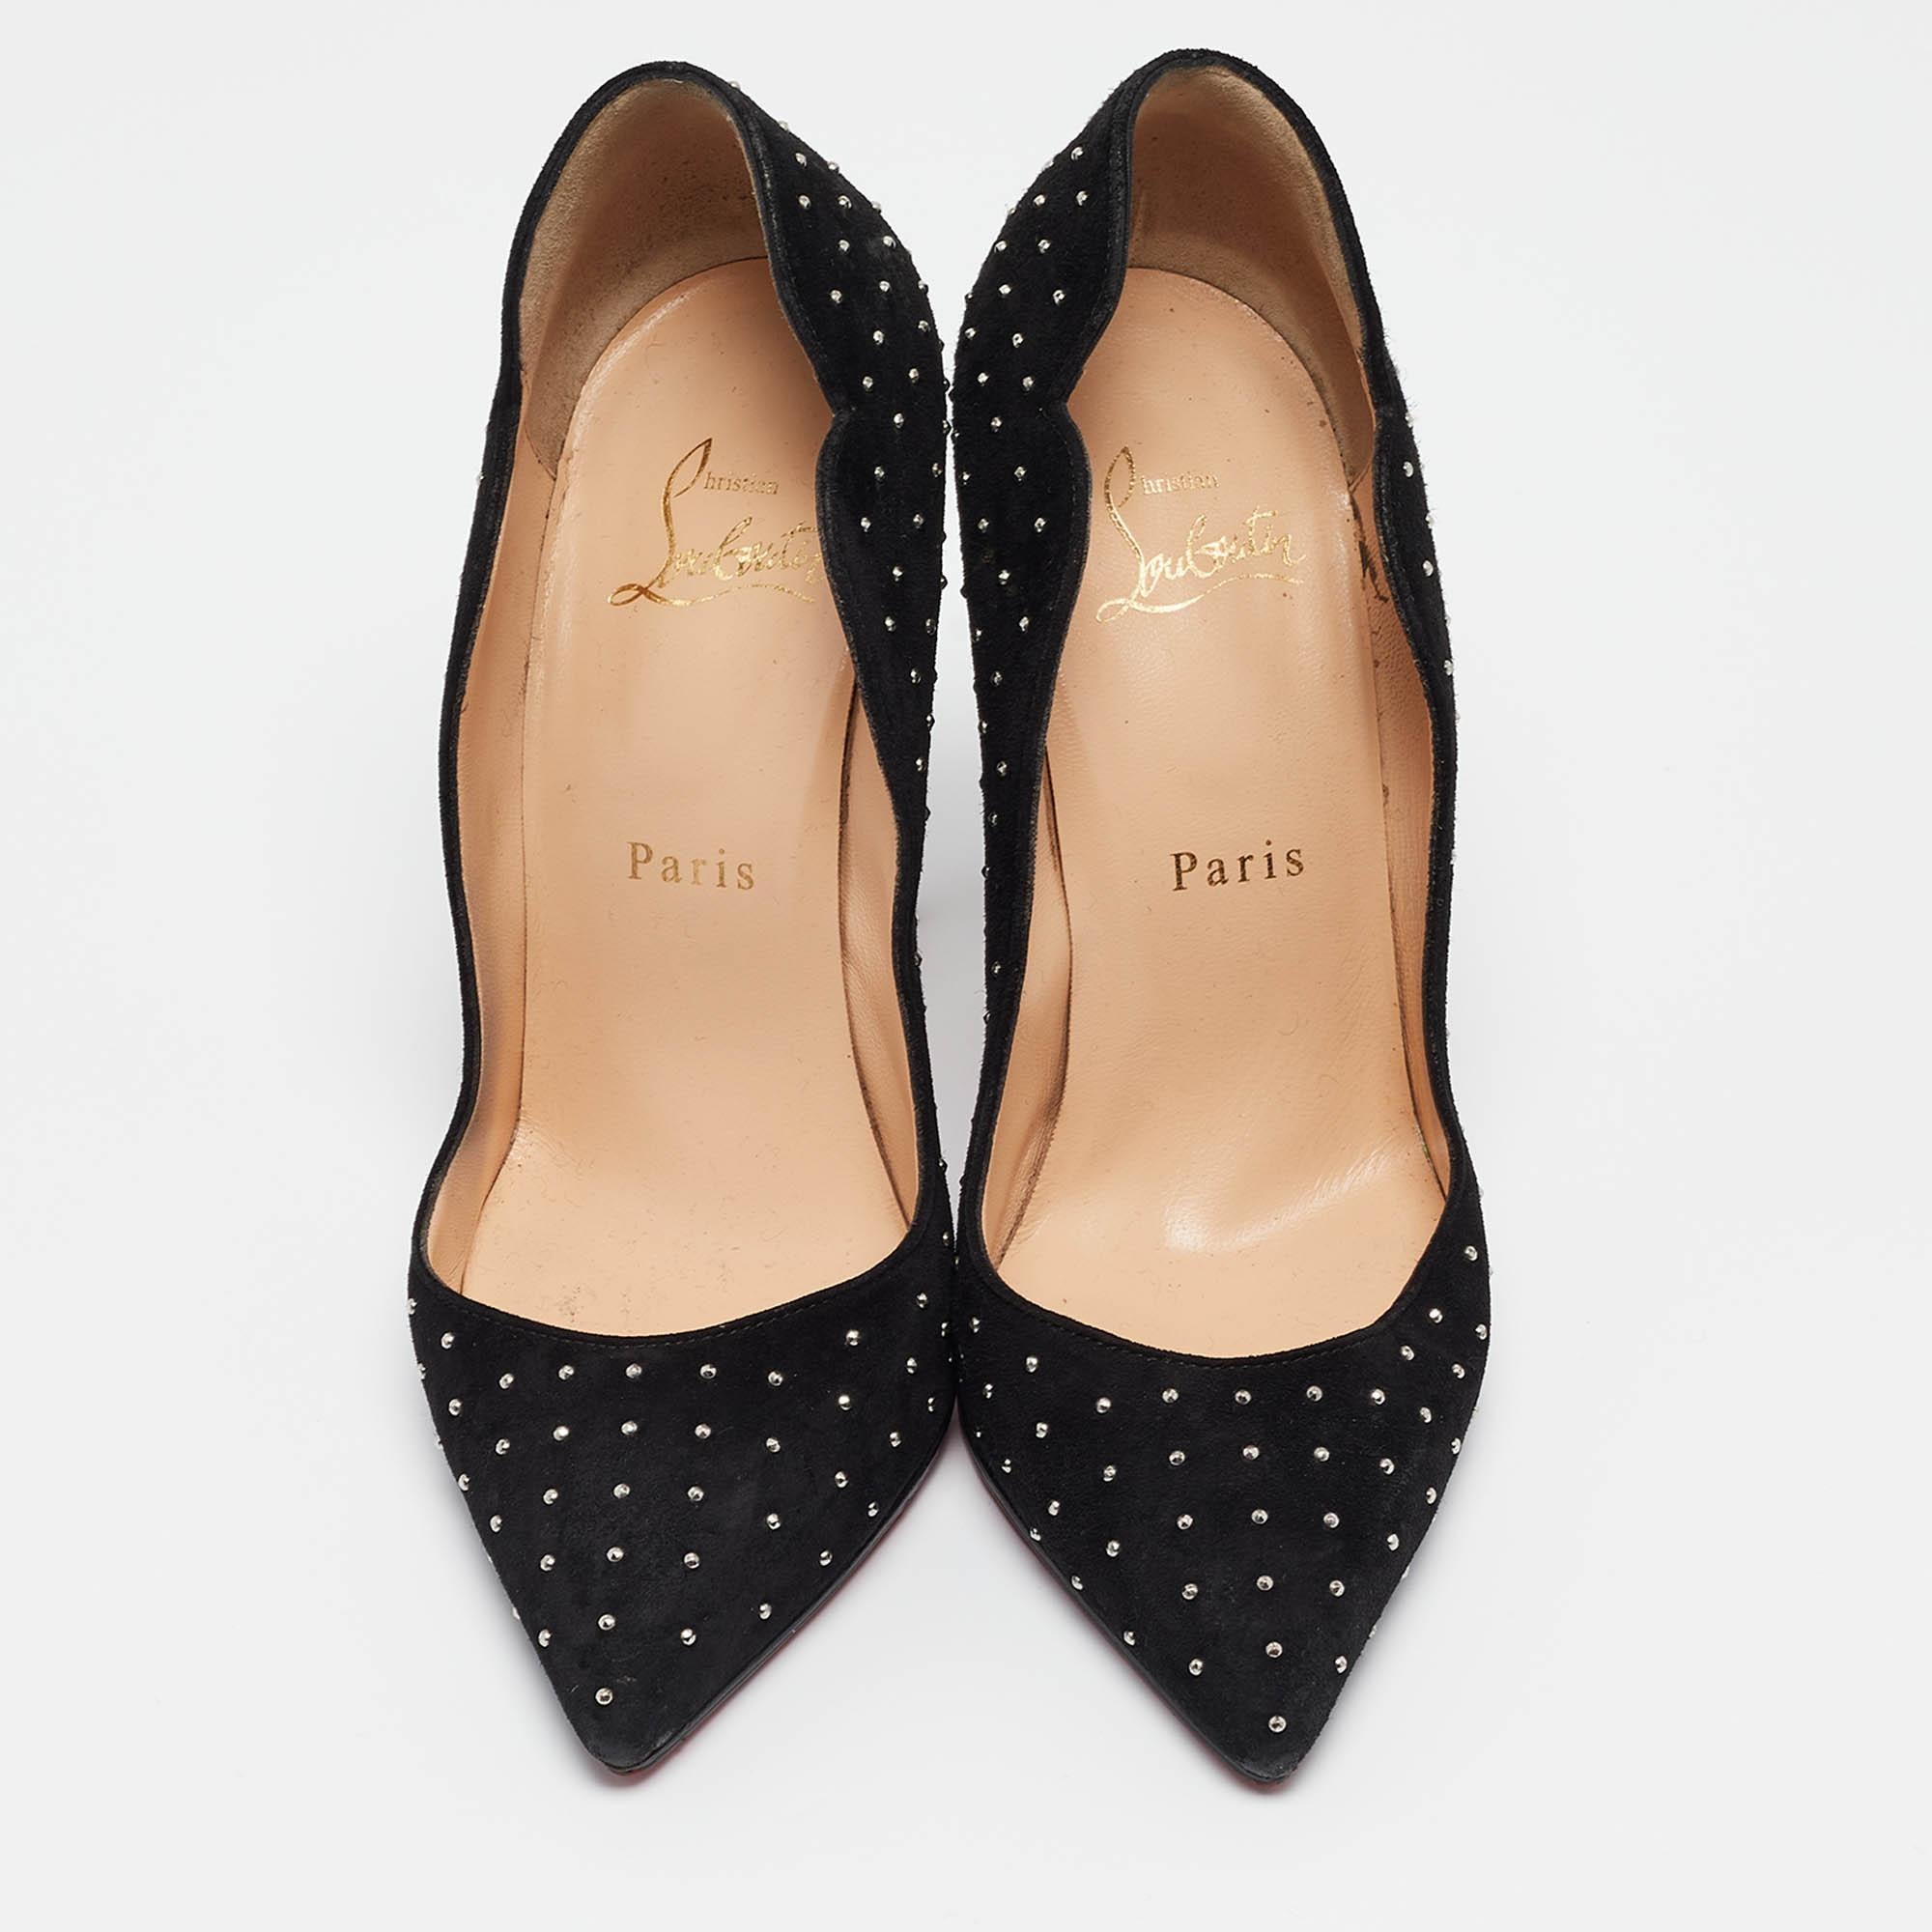 Christian Louboutin Black Studded Suede Hot Chick Pumps Size 36 For Sale 1